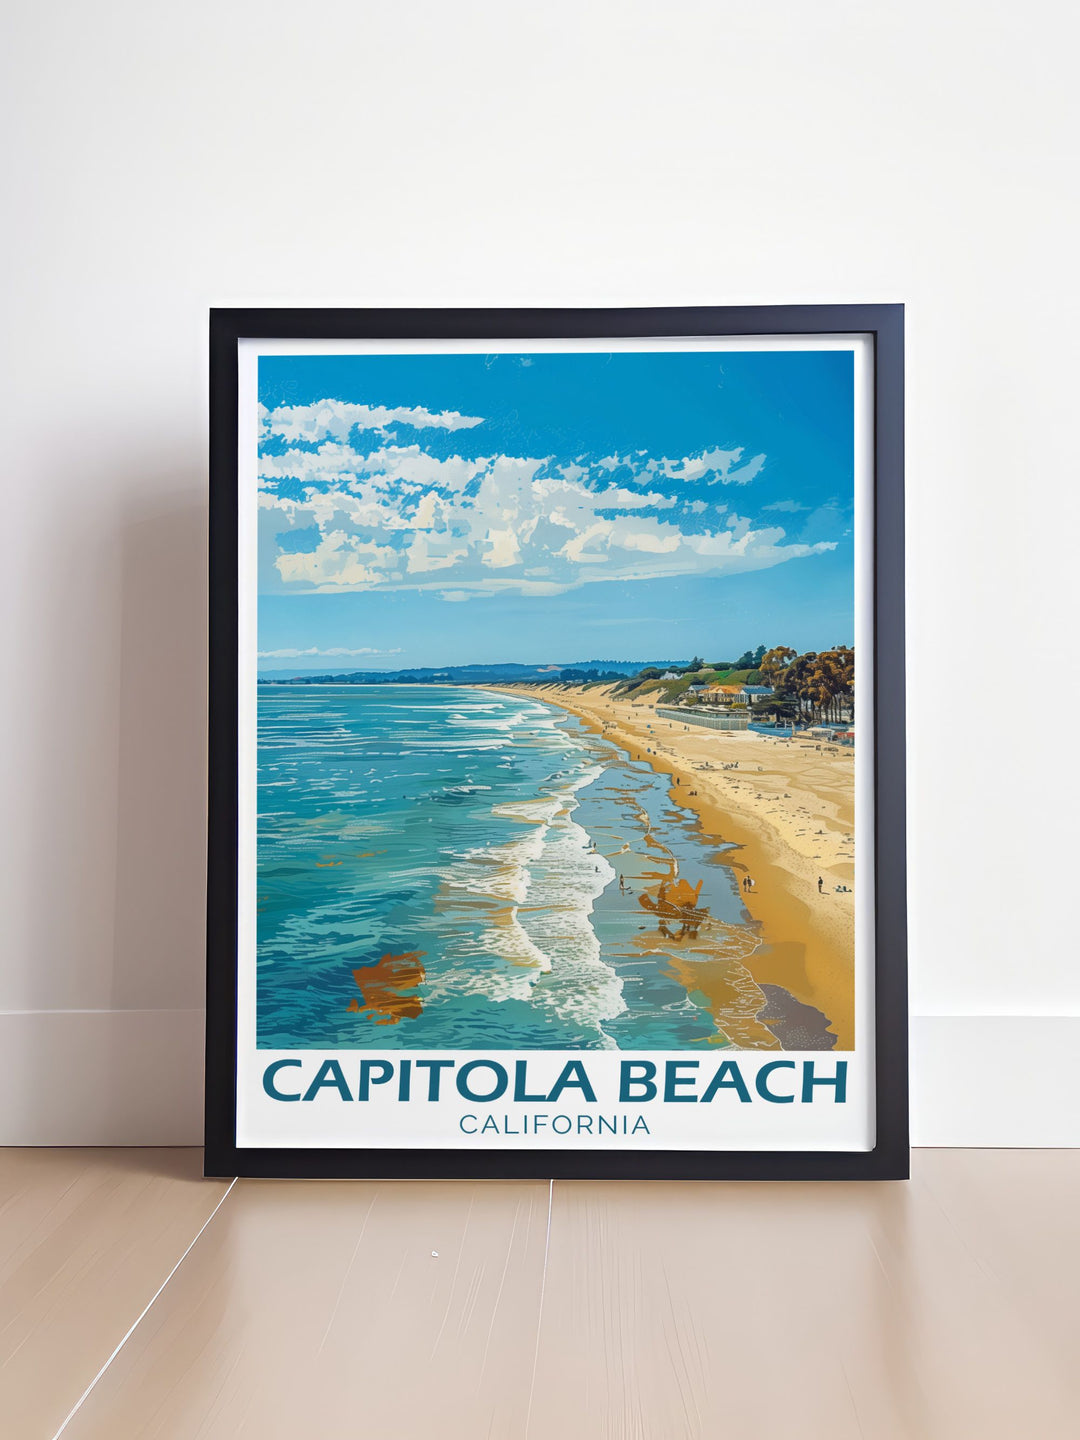 Unique Capitola Beach Poster capturing the essence of this serene location a must have for beach lovers and those who dream of experiencing the charm of Californias coastline perfect for personal enjoyment or as a special gift